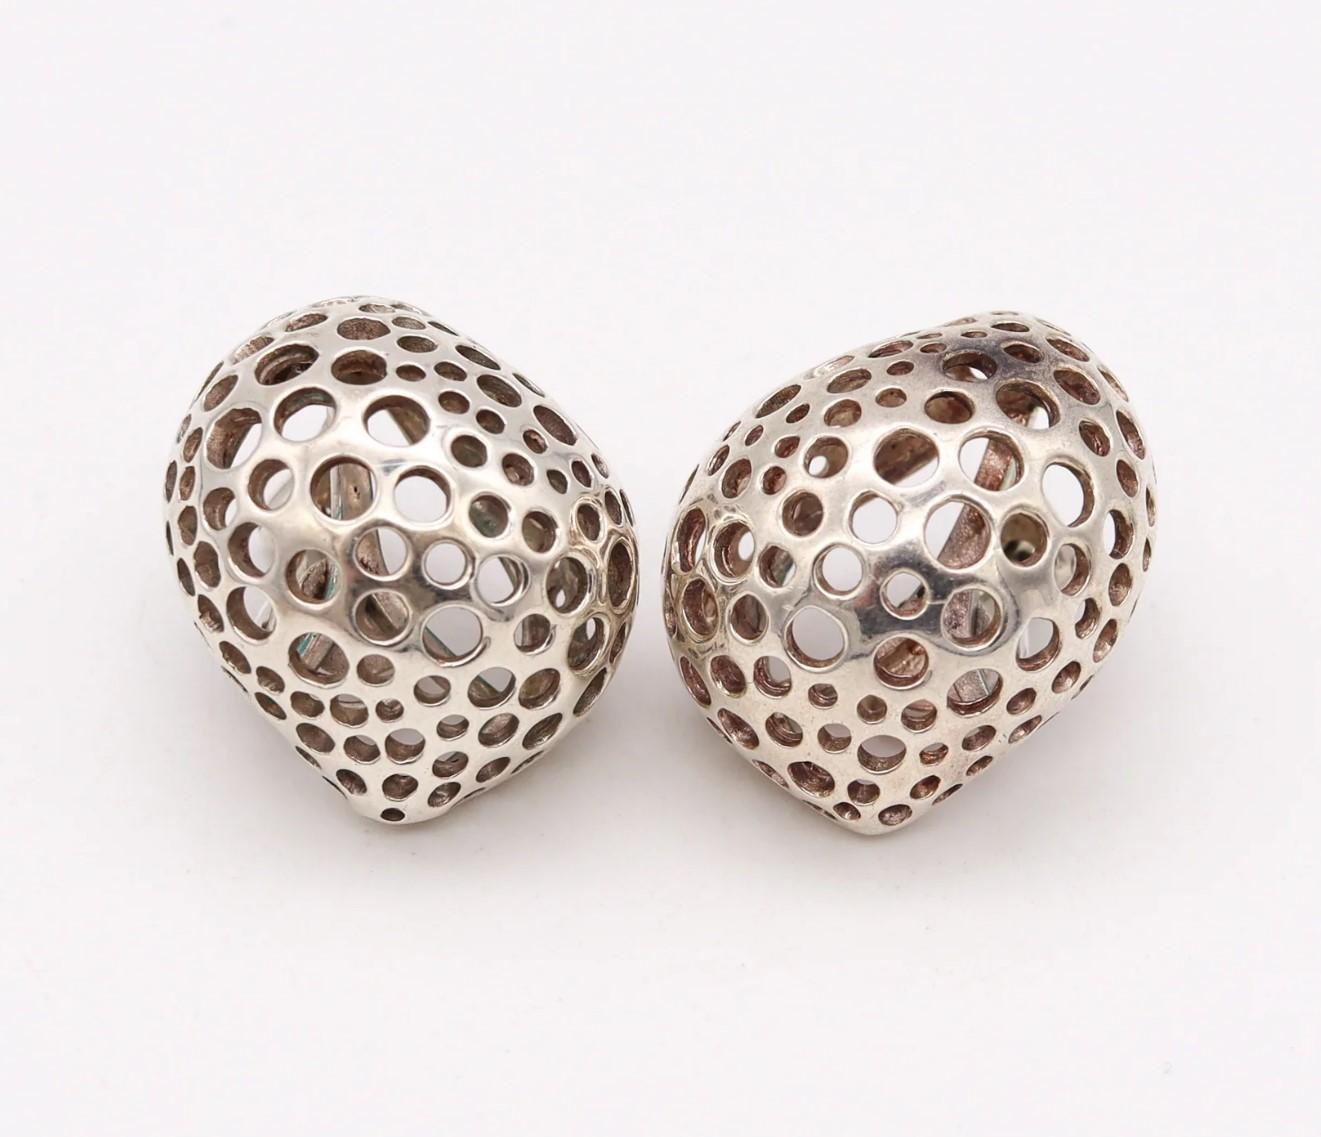 Pair of Perforations earrings designed by Angela Cummings.

Beautiful sculptural pair, created by Angela Cummings at her goldsmith studio in New York city, back in the 1981. These modernist and bold earrings has been crafted with free-forms holed